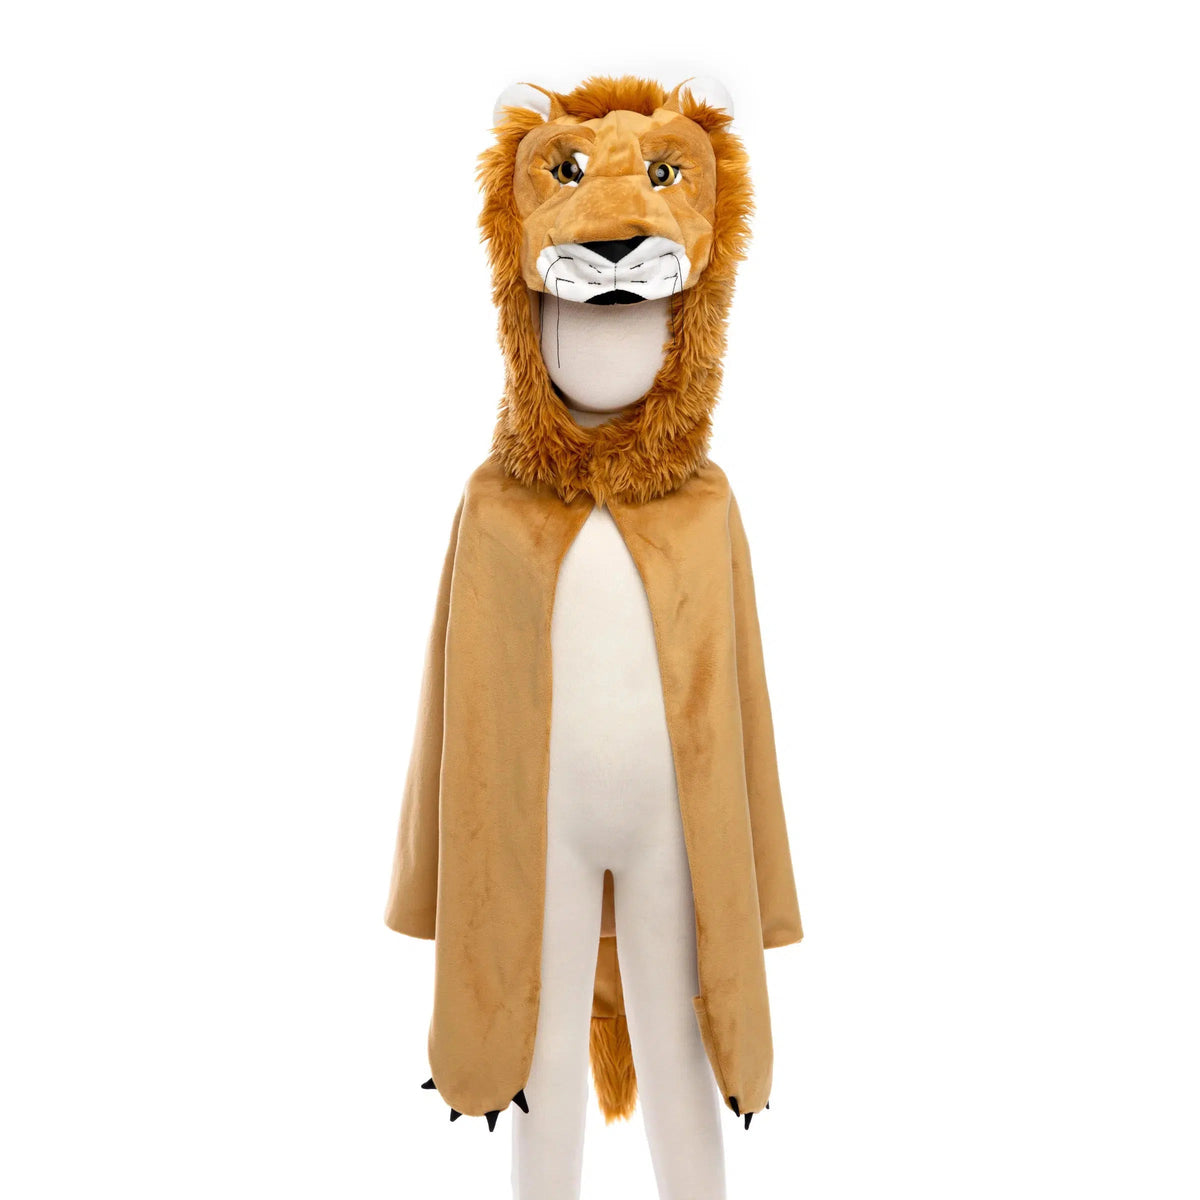 Front view of the lion cape on a mannequin.